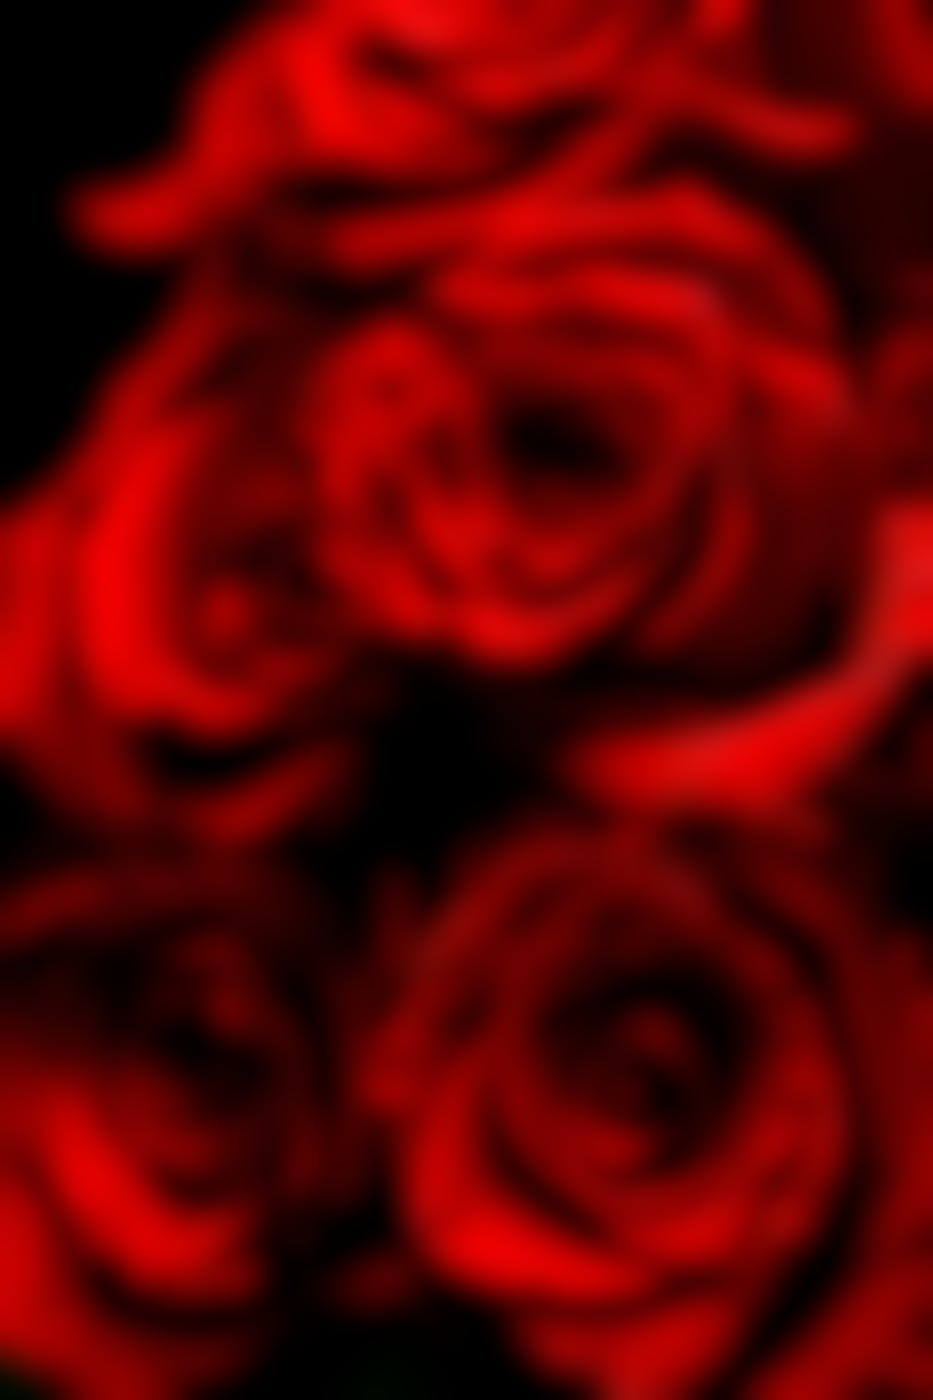 A close up of red roses